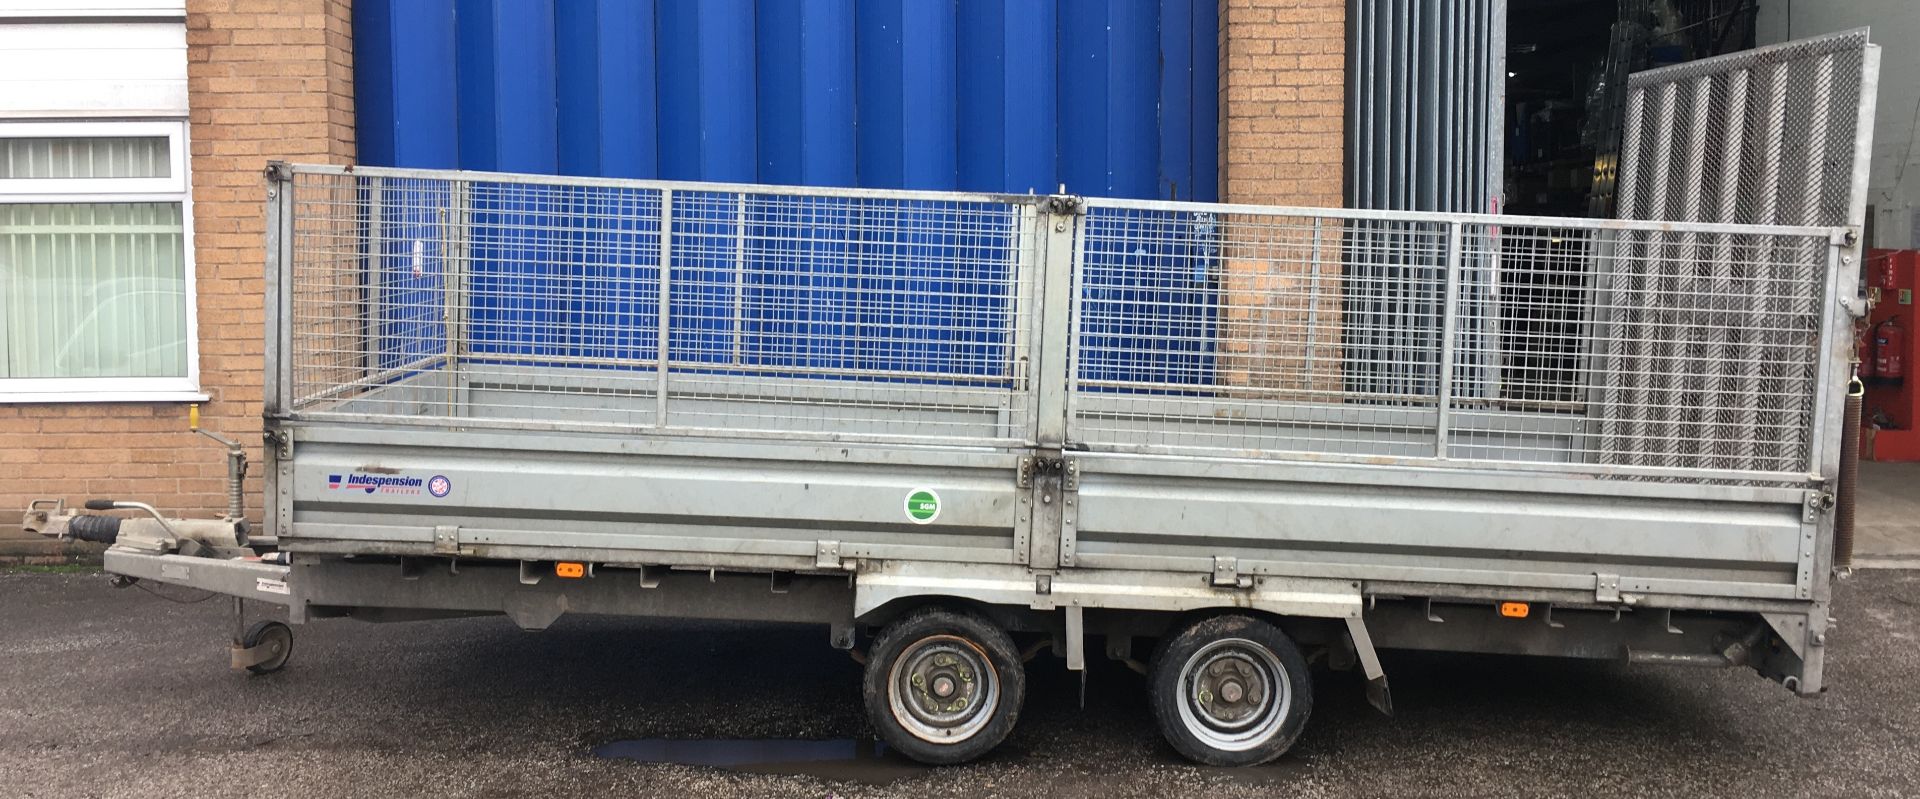 Indespension FTL35166DS 3500kg Twin-Axle Flatbed Trailer | YOM: 2007